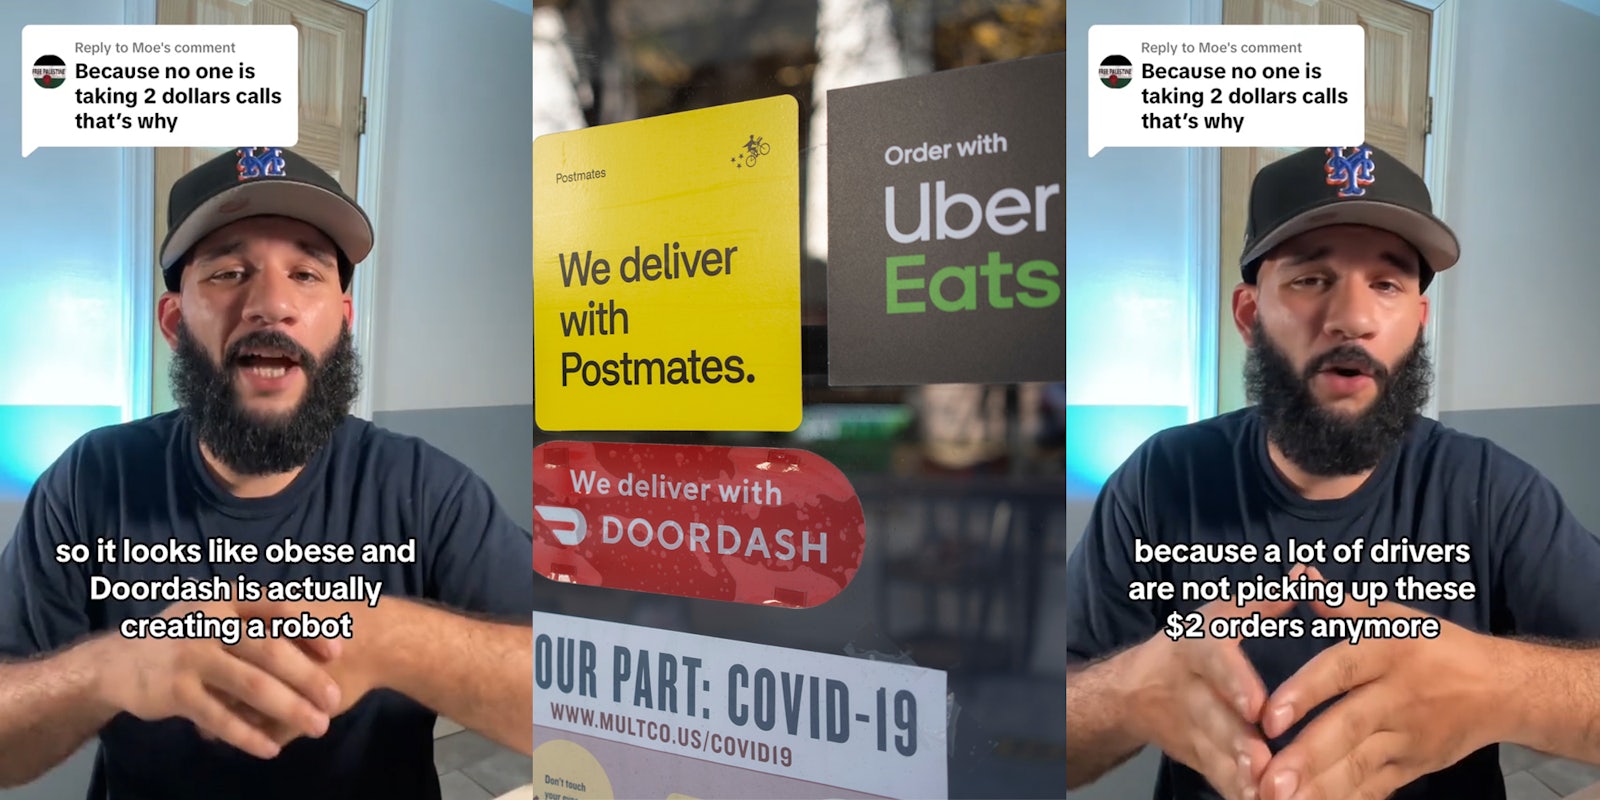 Uber Eats driver speaking with caption 'Because no one is taking 2 dollars calls that's why' 'so it looks like obese and Doordash is actually creating a robot' (l) DoorDash Uber Eats signs on glass door (c) Uber Eats driver speaking with caption 'Because no one is taking 2 dollars calls that's why' 'because a lot of drivers are not picking up these $2 orders anymore' (r)